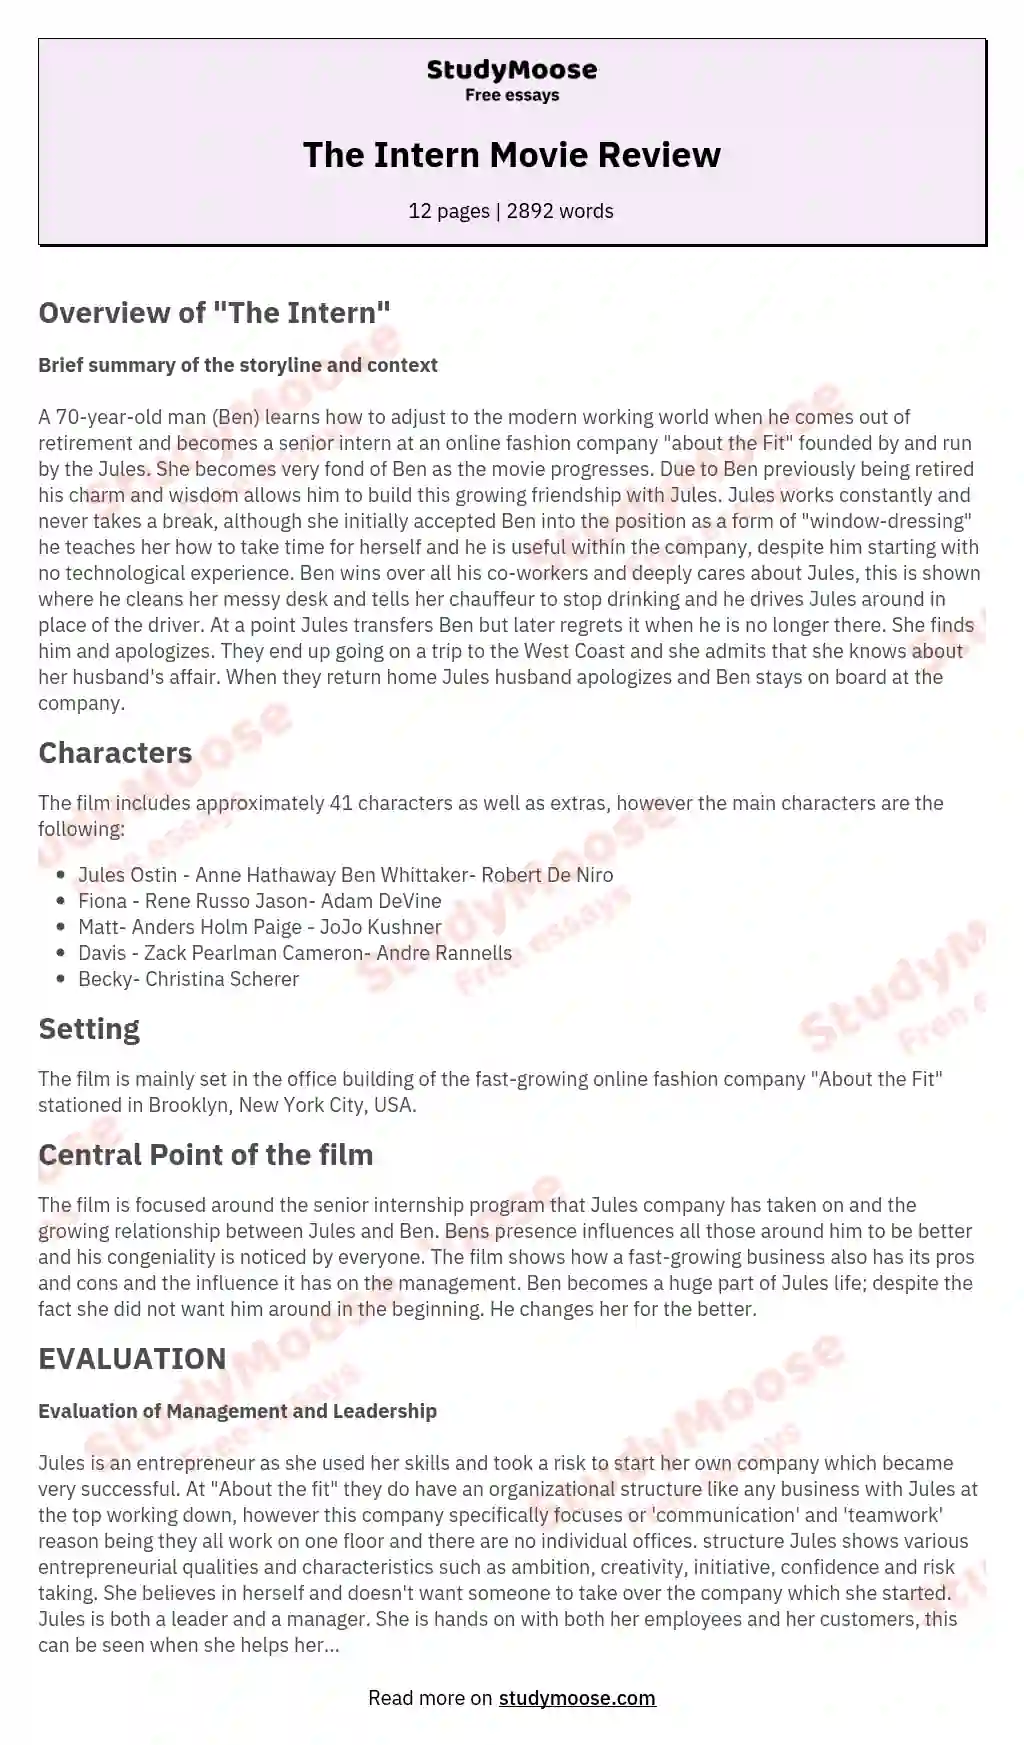 how to write an evaluation essay on a movie